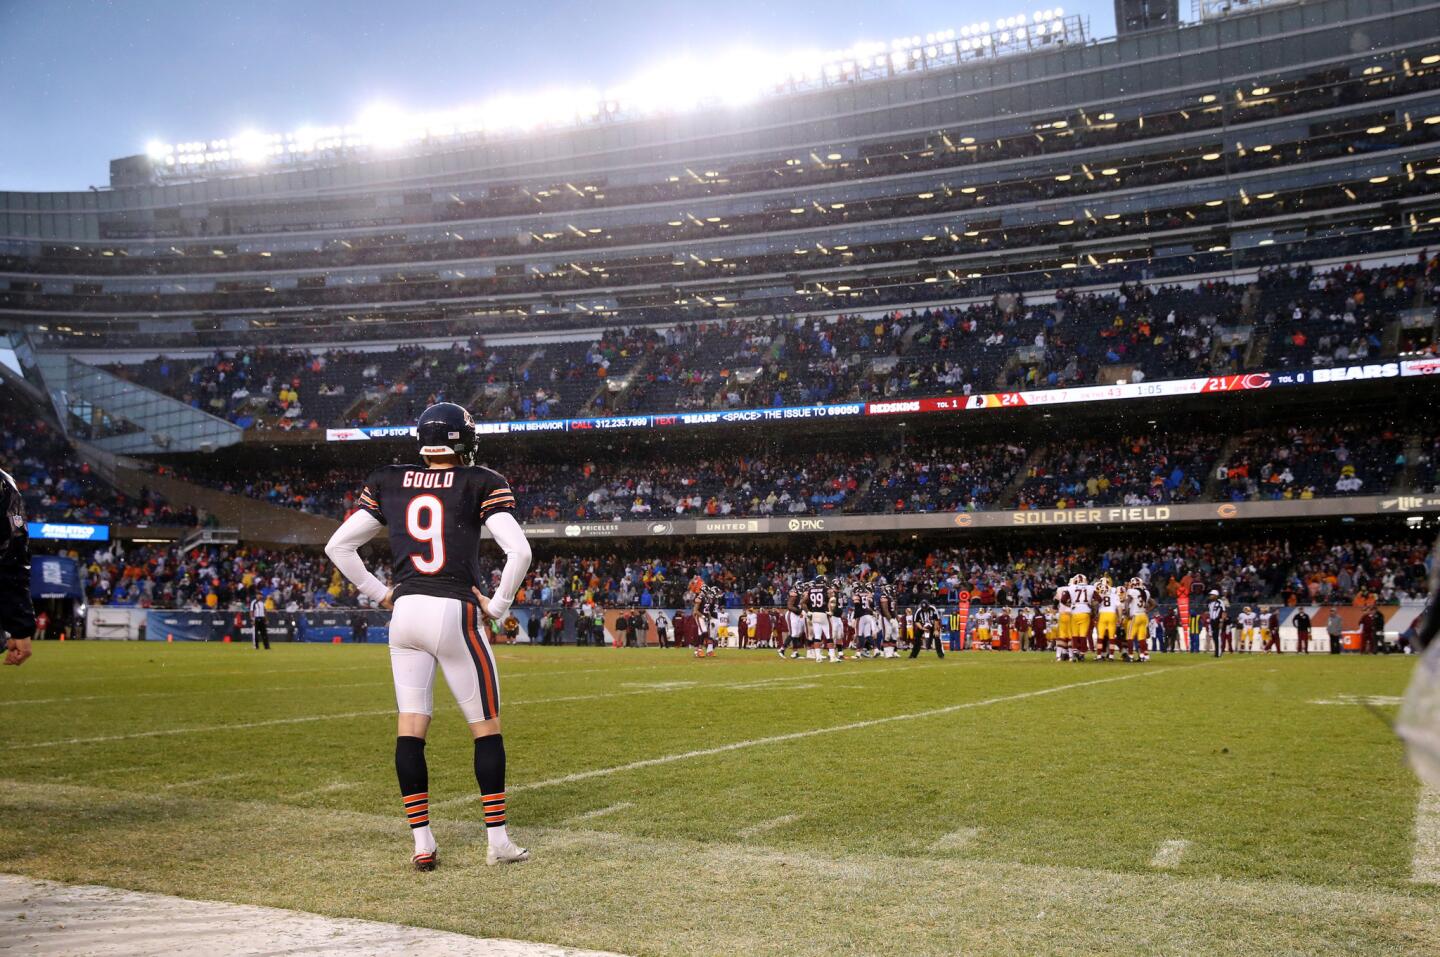 Robbie Gould watches the final plays of the game as the Bears lose to the Redskins 24-21.